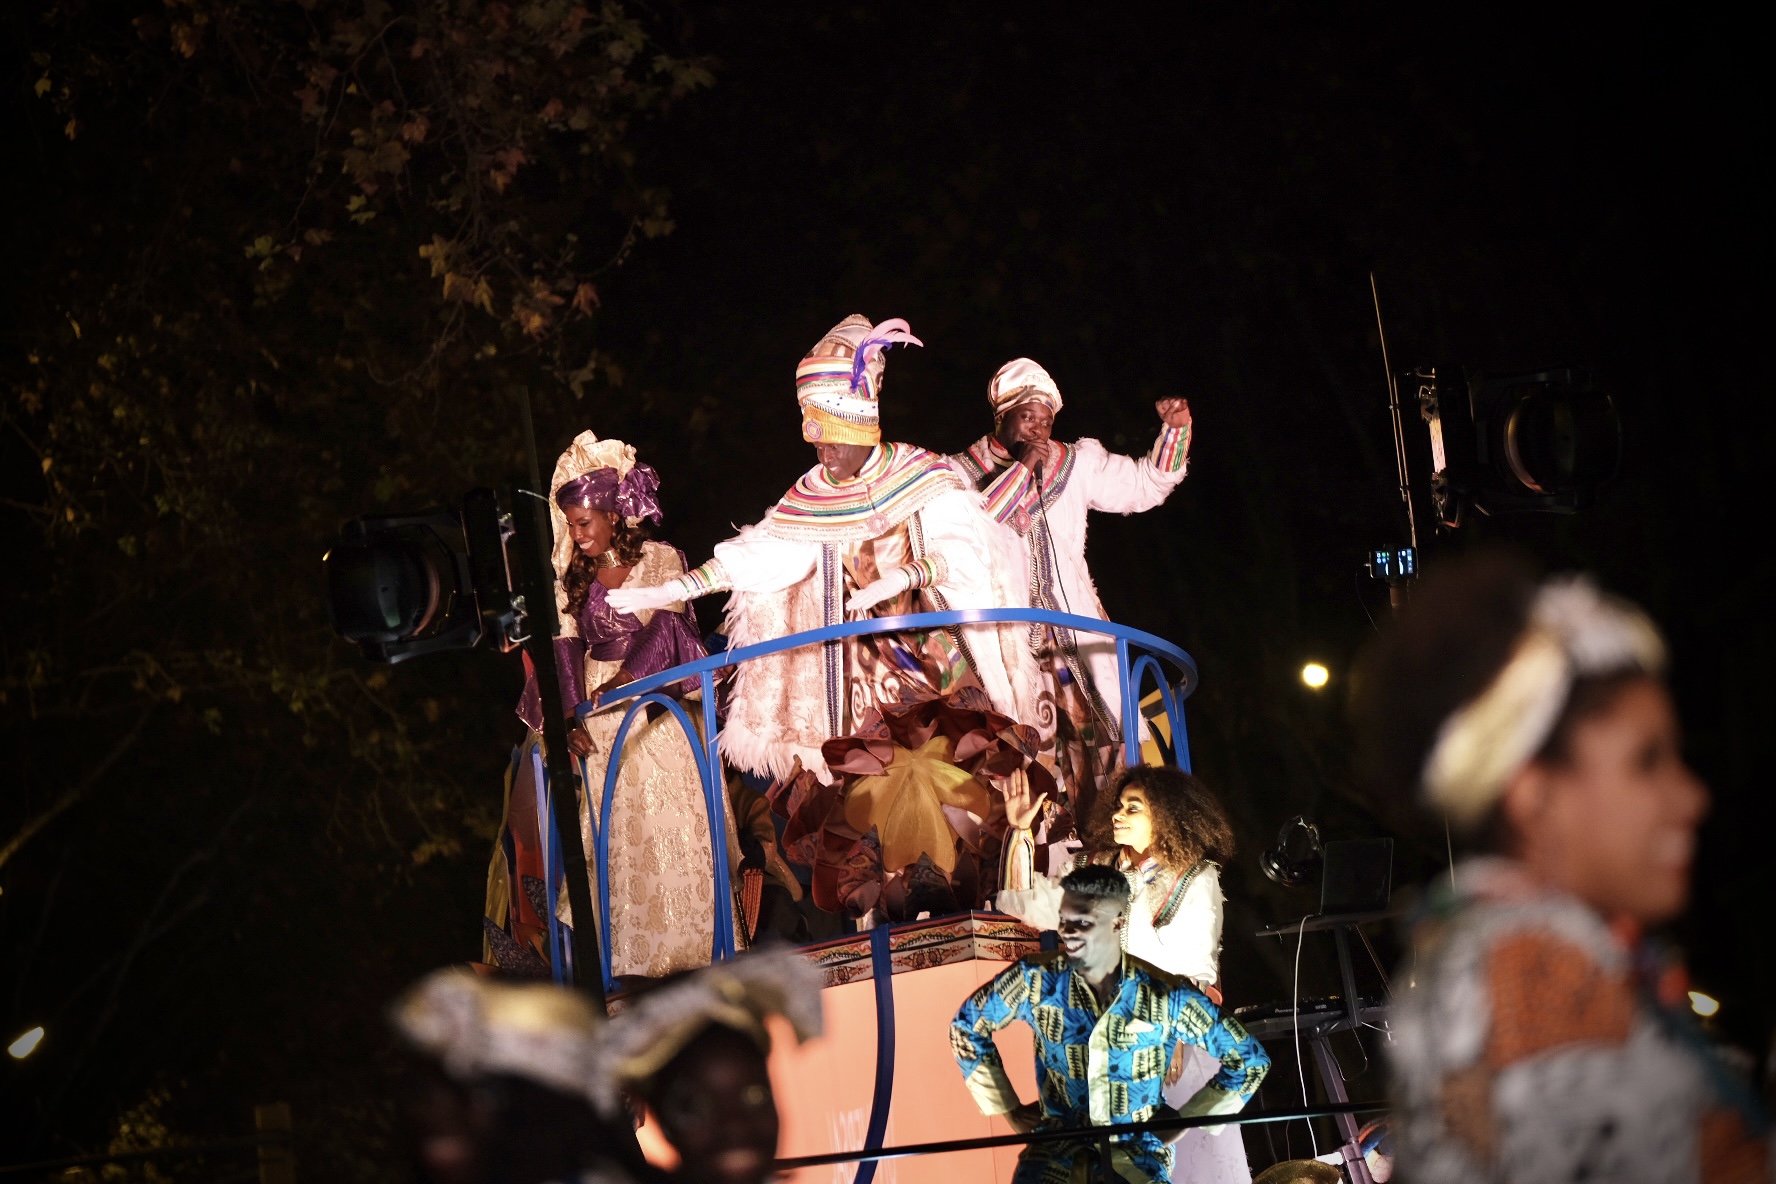 MAP | The Three Kings in Barcelona: where to see the parade on January 5th